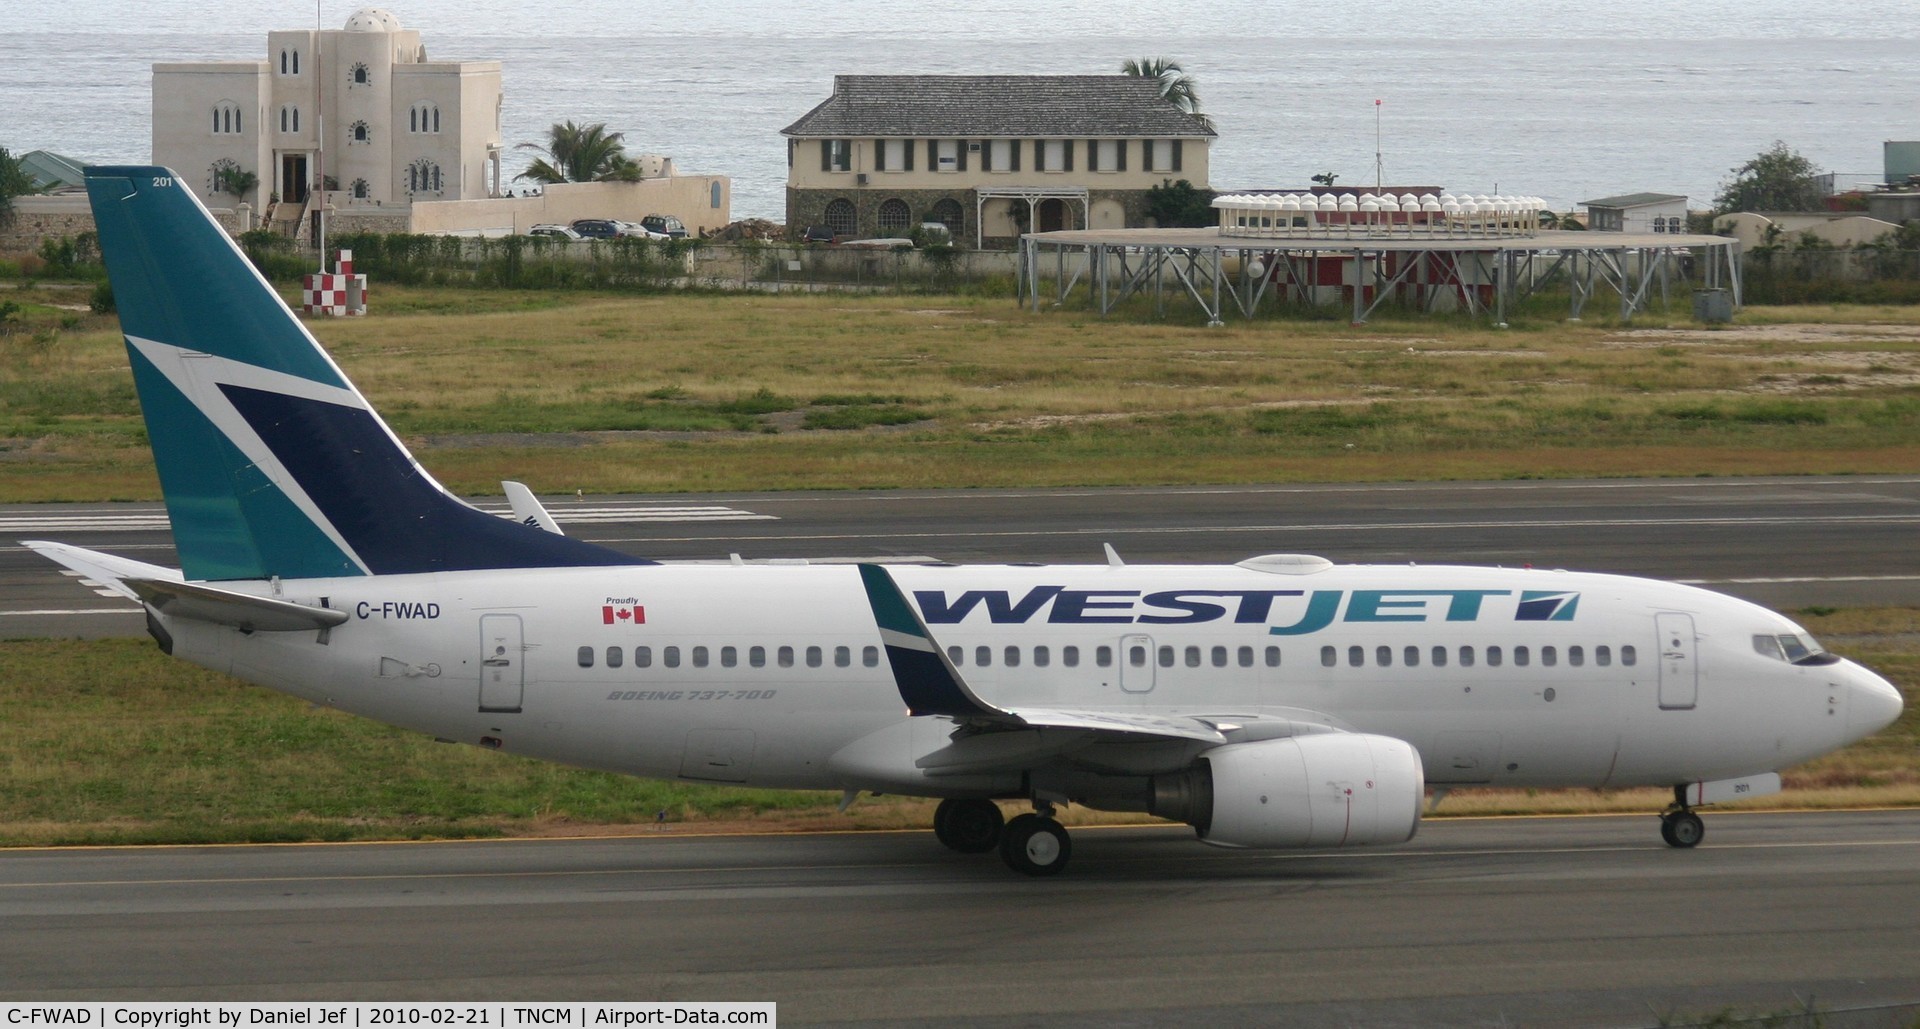 C-FWAD, 2002 Boeing 737-7CT C/N 32753, Westjet C-FWAD at the holding point Alpha